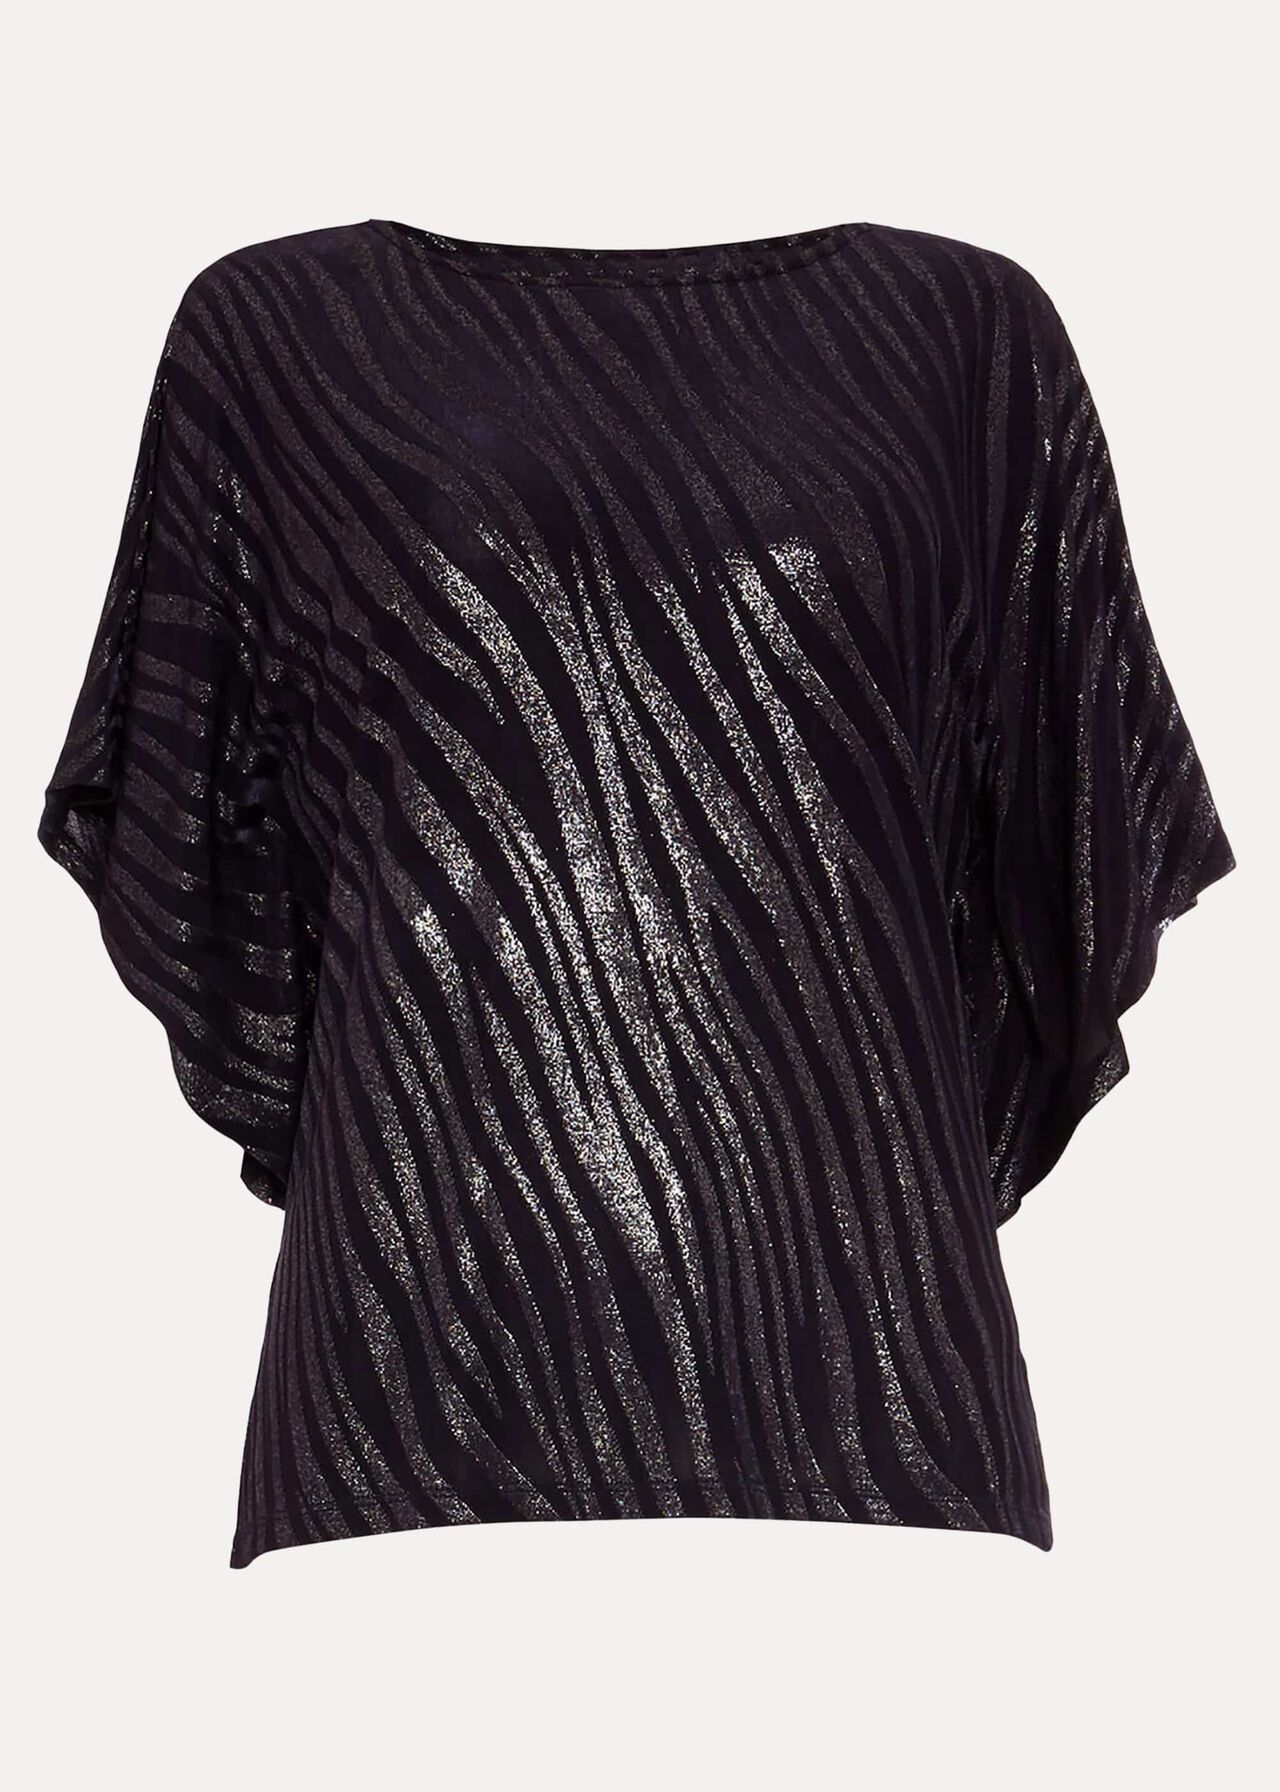 Salome Shimmer Top